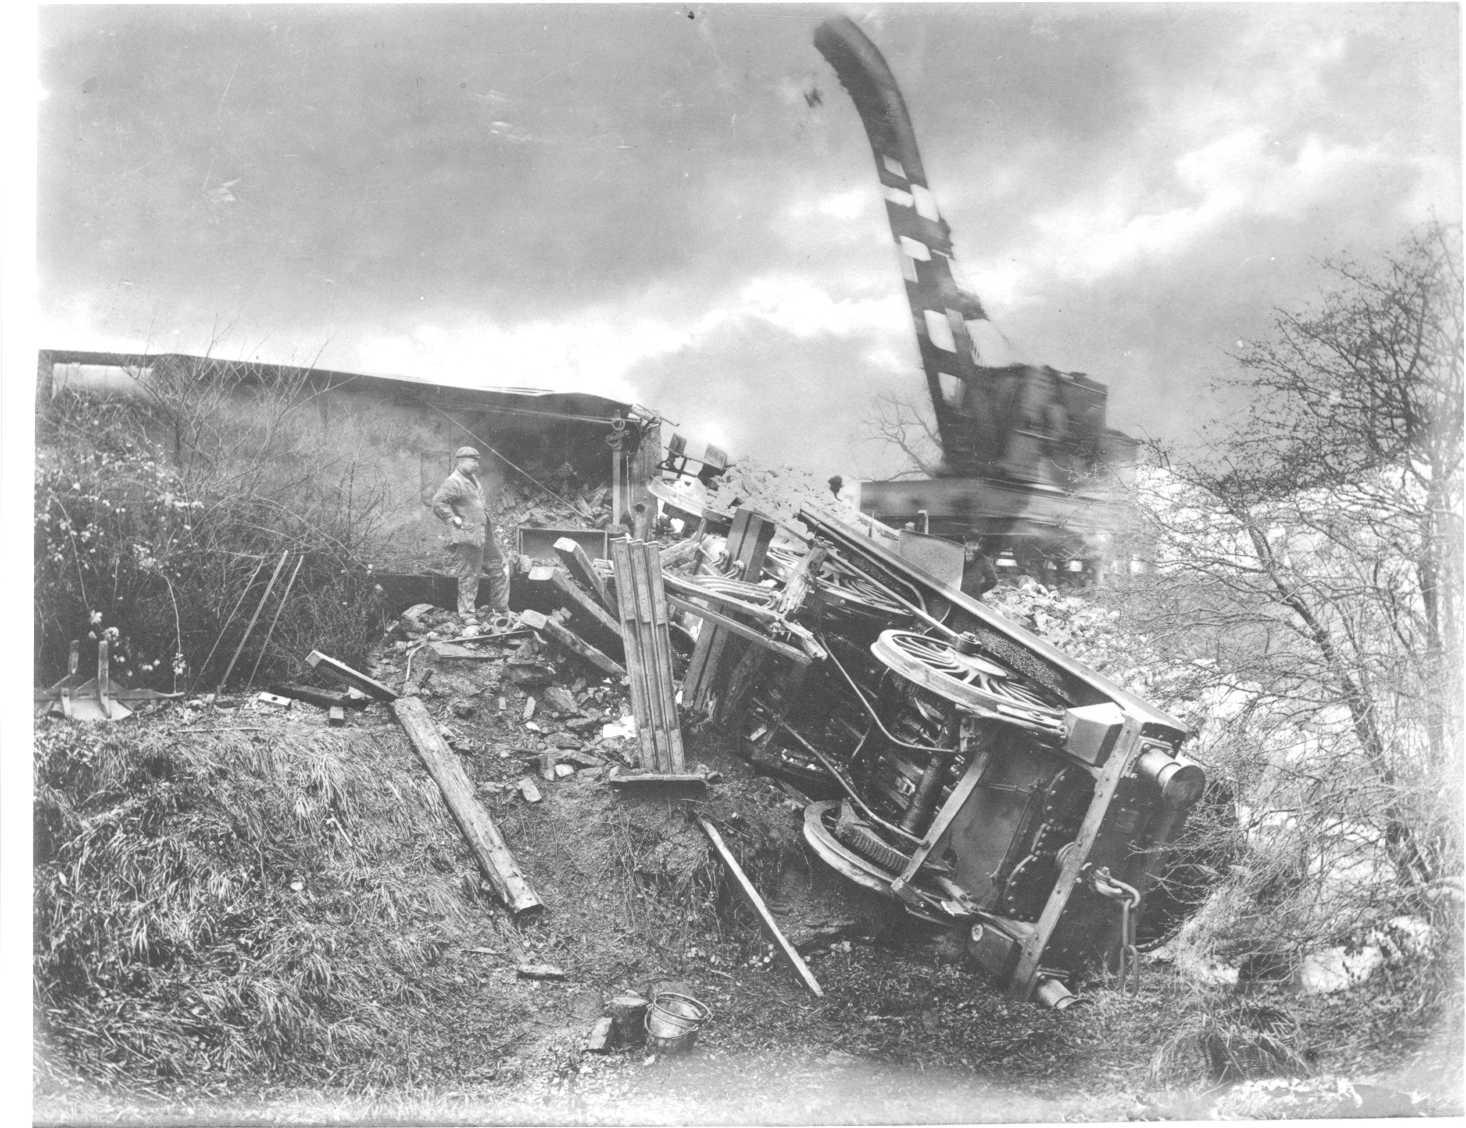 Peckwash Mill accident scene from the south